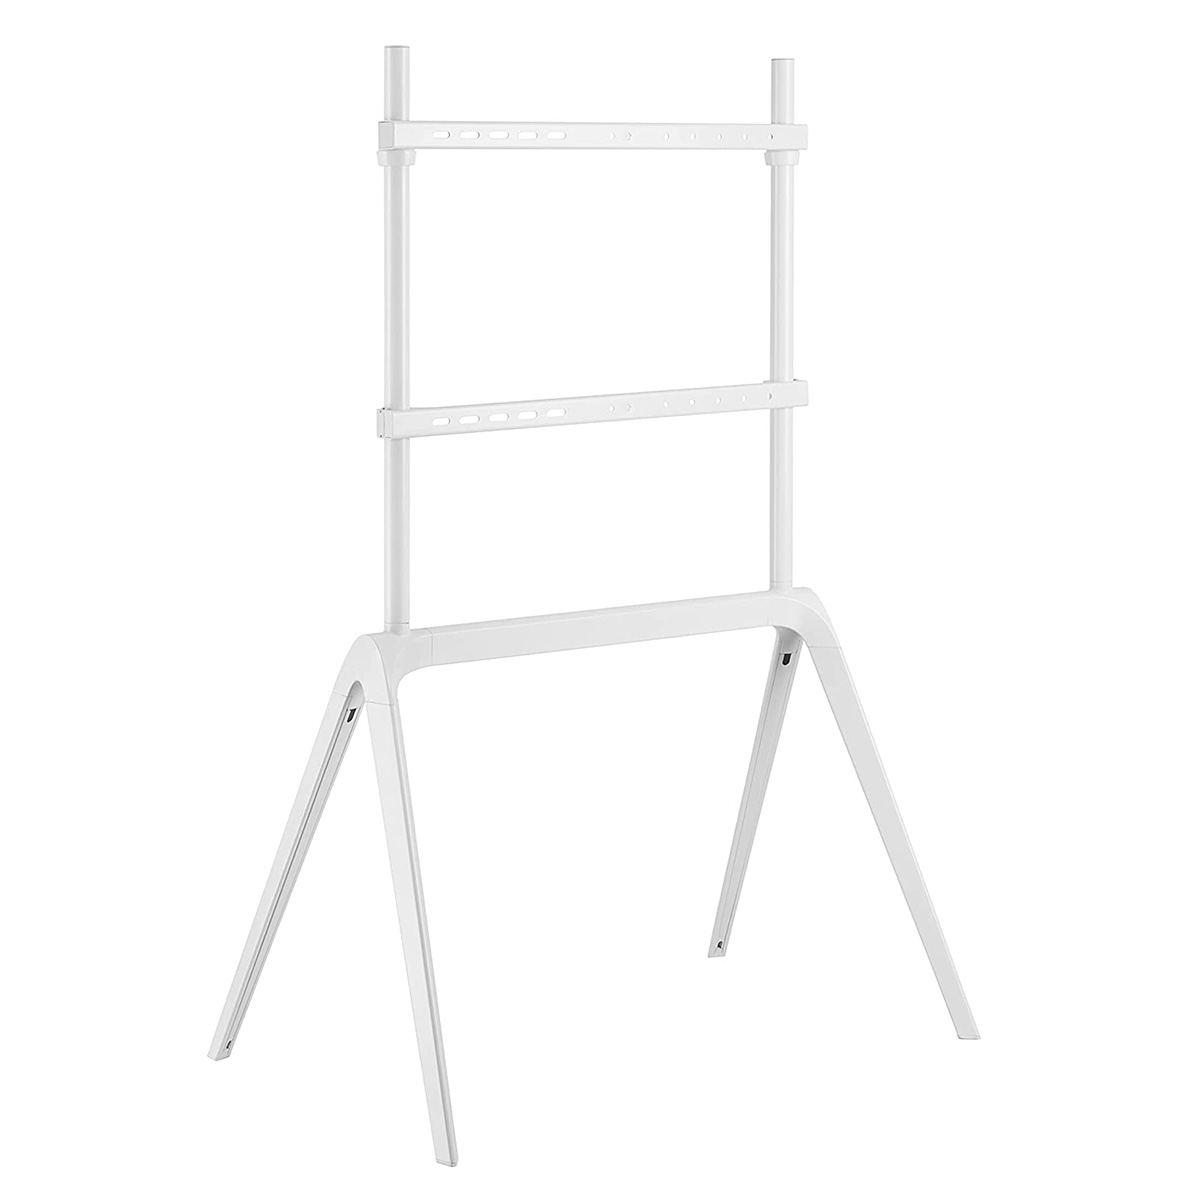 AVS-6586S Artistic Steel Easel Studio TV Display Stand for 65″ to 86″ TV’s (White)